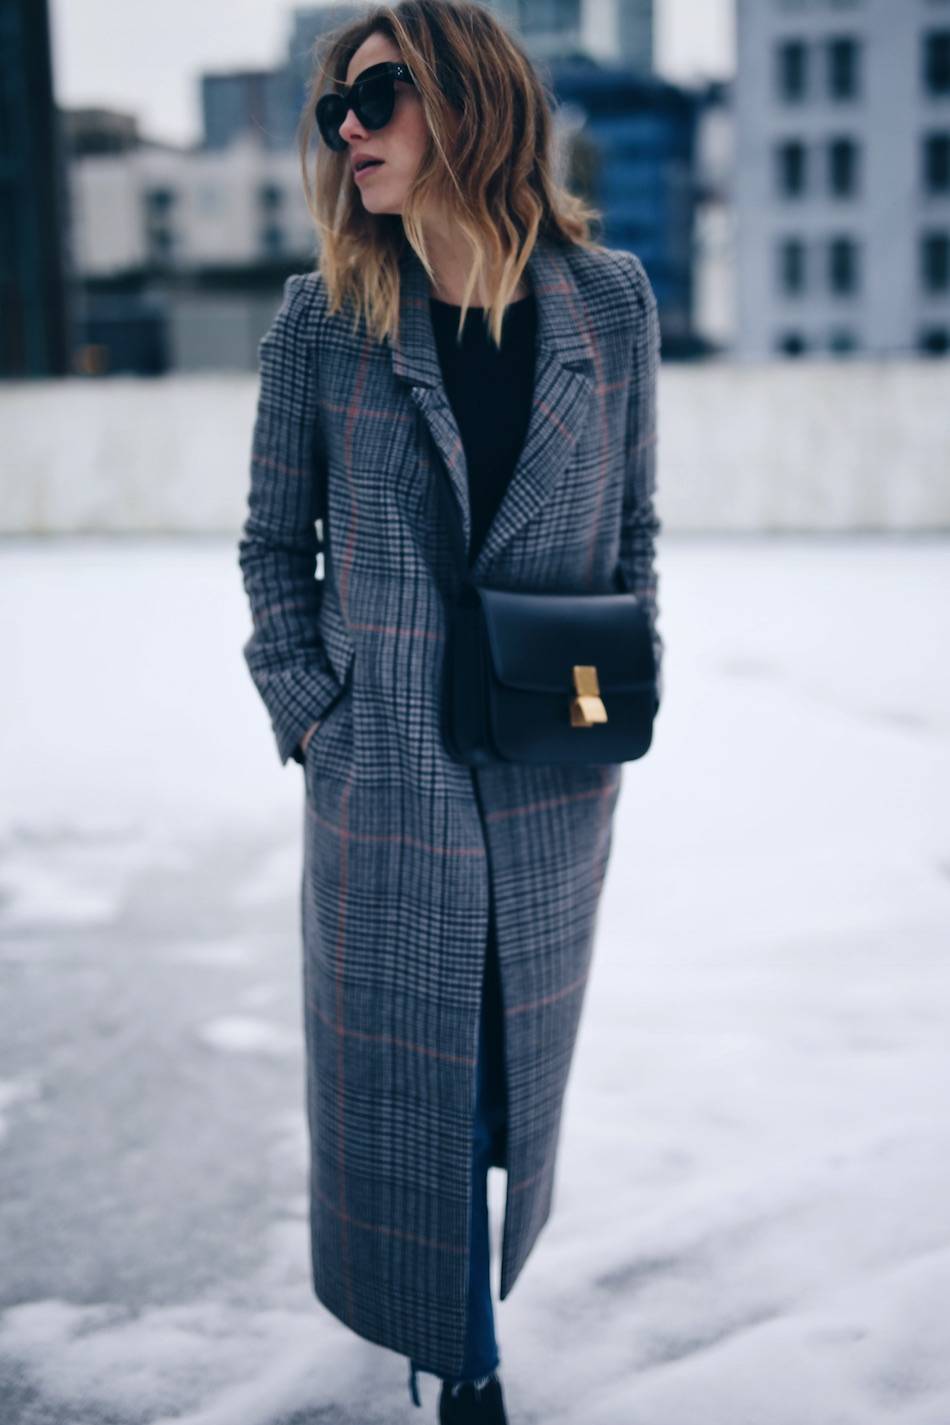 Style and beauty blogger Jill Lansky of The August Diaries on how to stay warm and stylish in the winter in H&M plaid coat, Celine black box bag